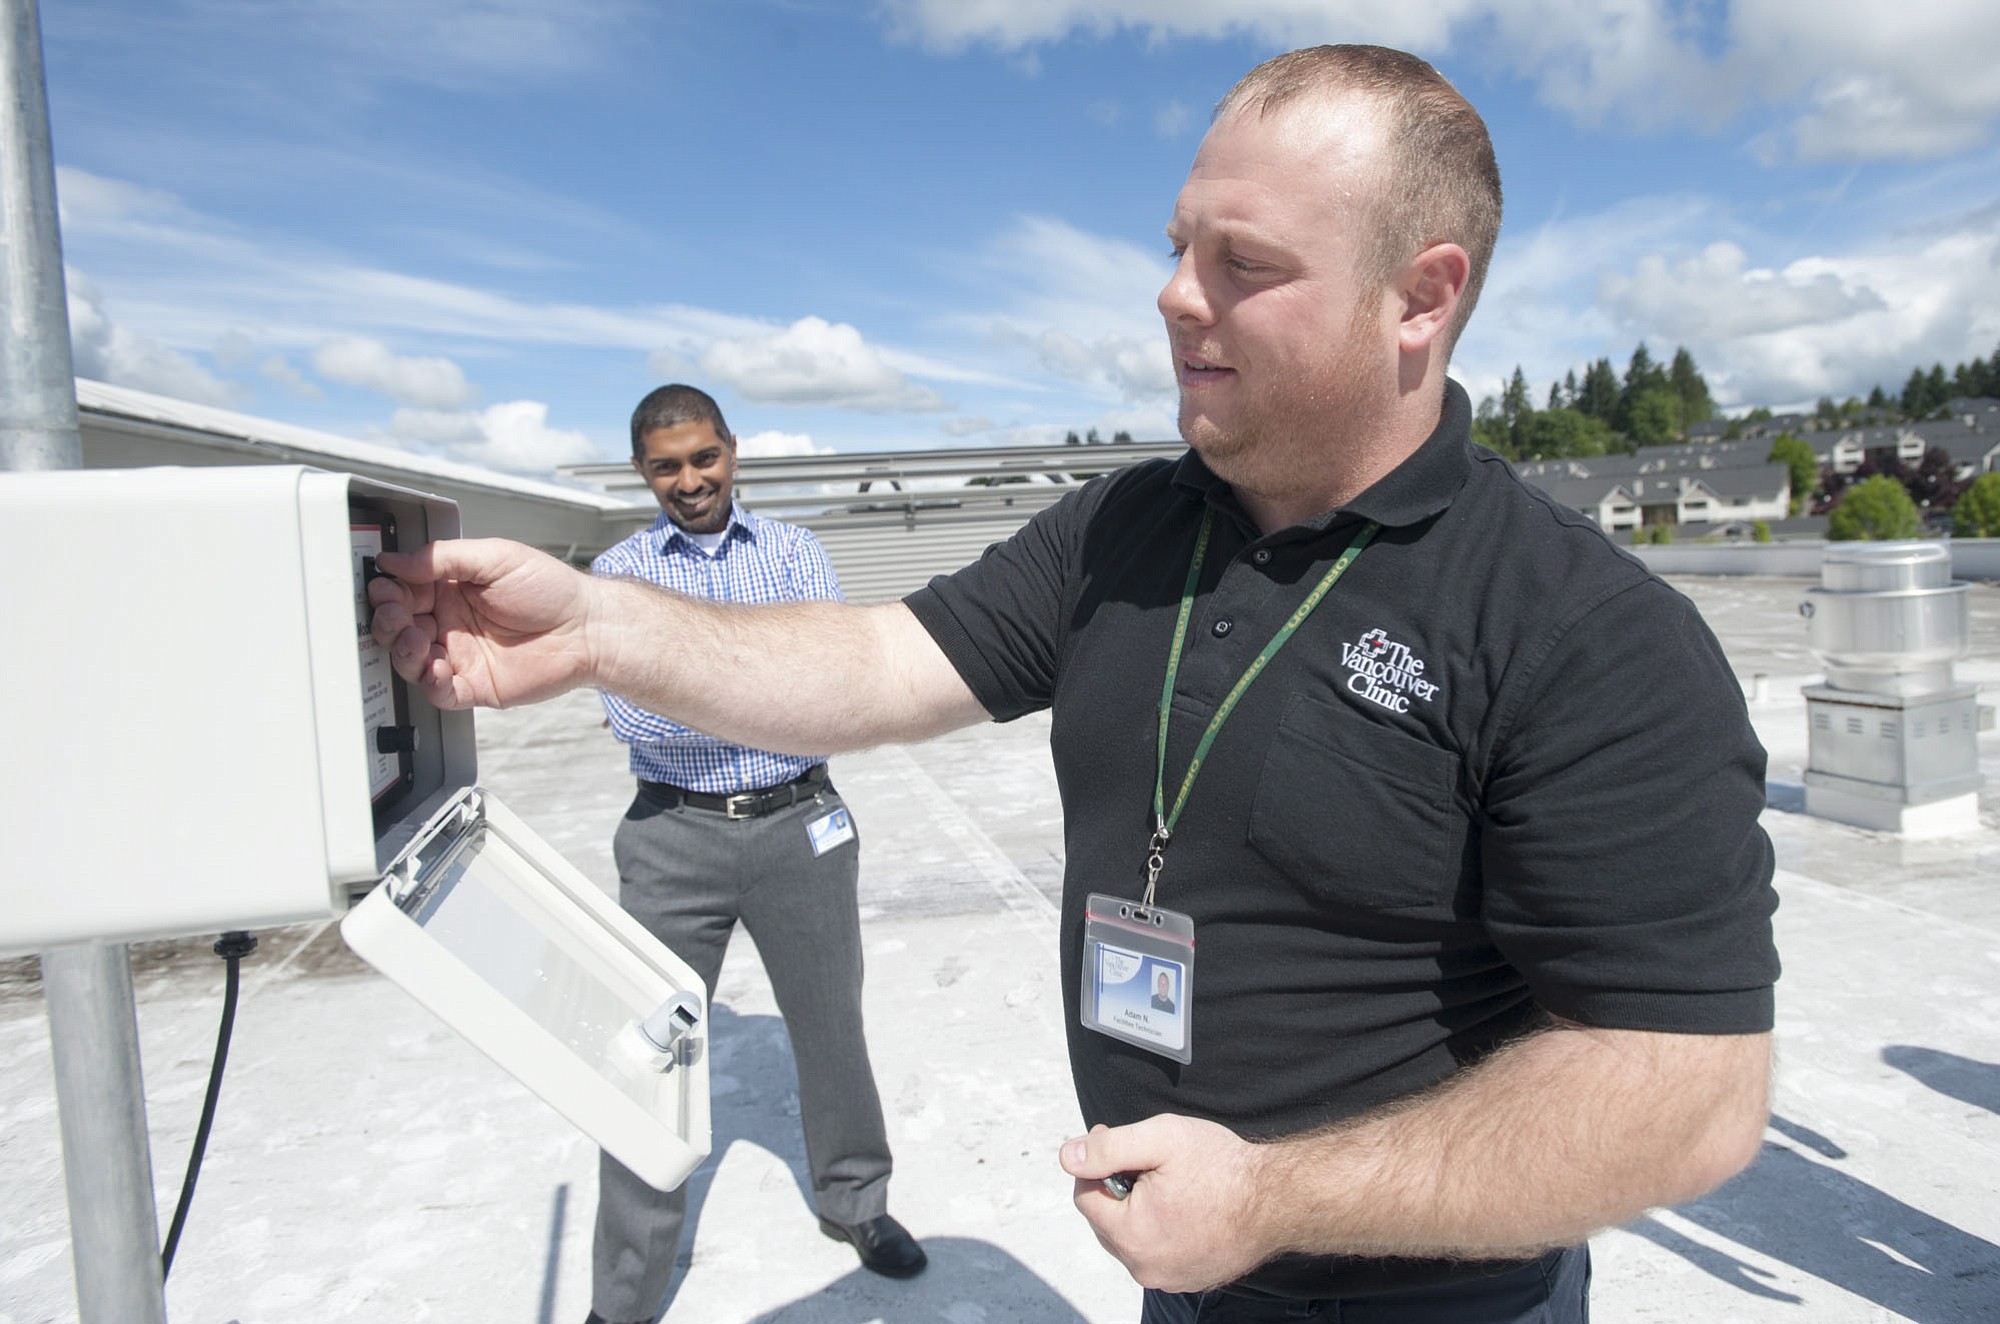 Facilities technician Adam Norman tests the pollen counting machine on the roof of The Vancouver Clinic Salmon Creek office as Dr. Raj Srinivasan looks on. Norman collects samples from the roof three days a week.